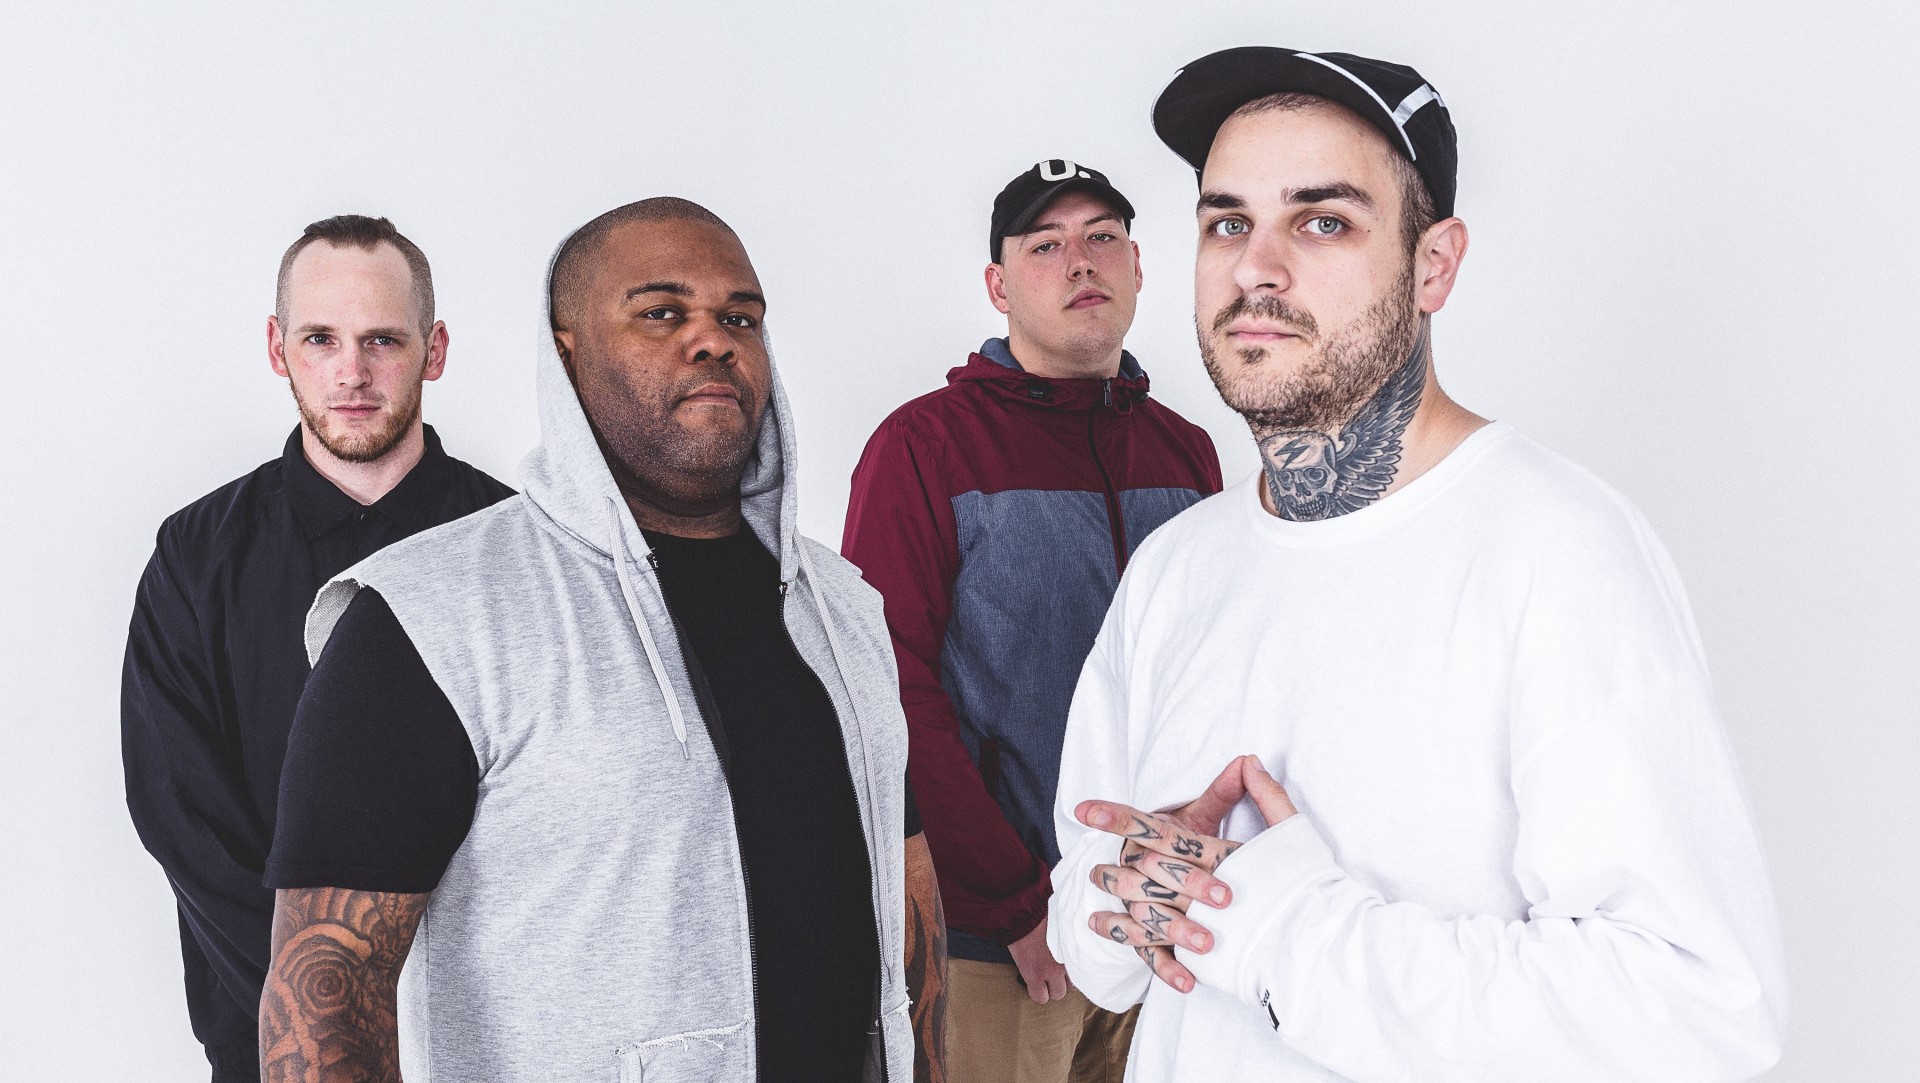 NEWS EMMURE announce their UK tour with support from RISE OF THE